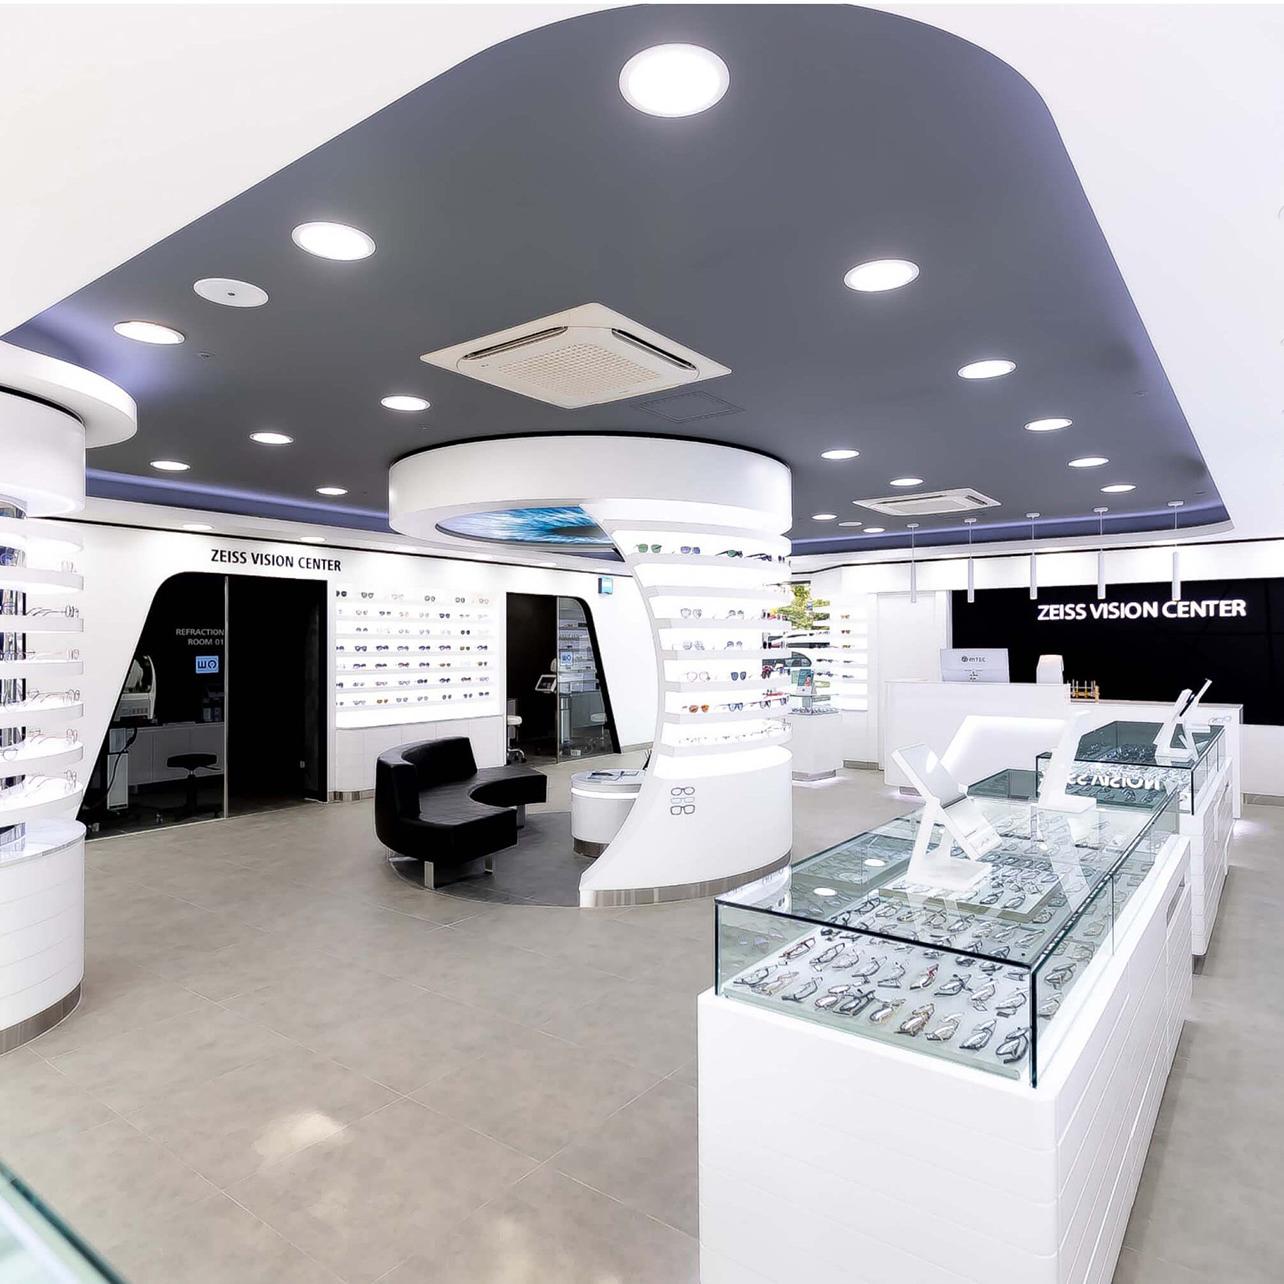 ZEISS VISION CENTER Changwon